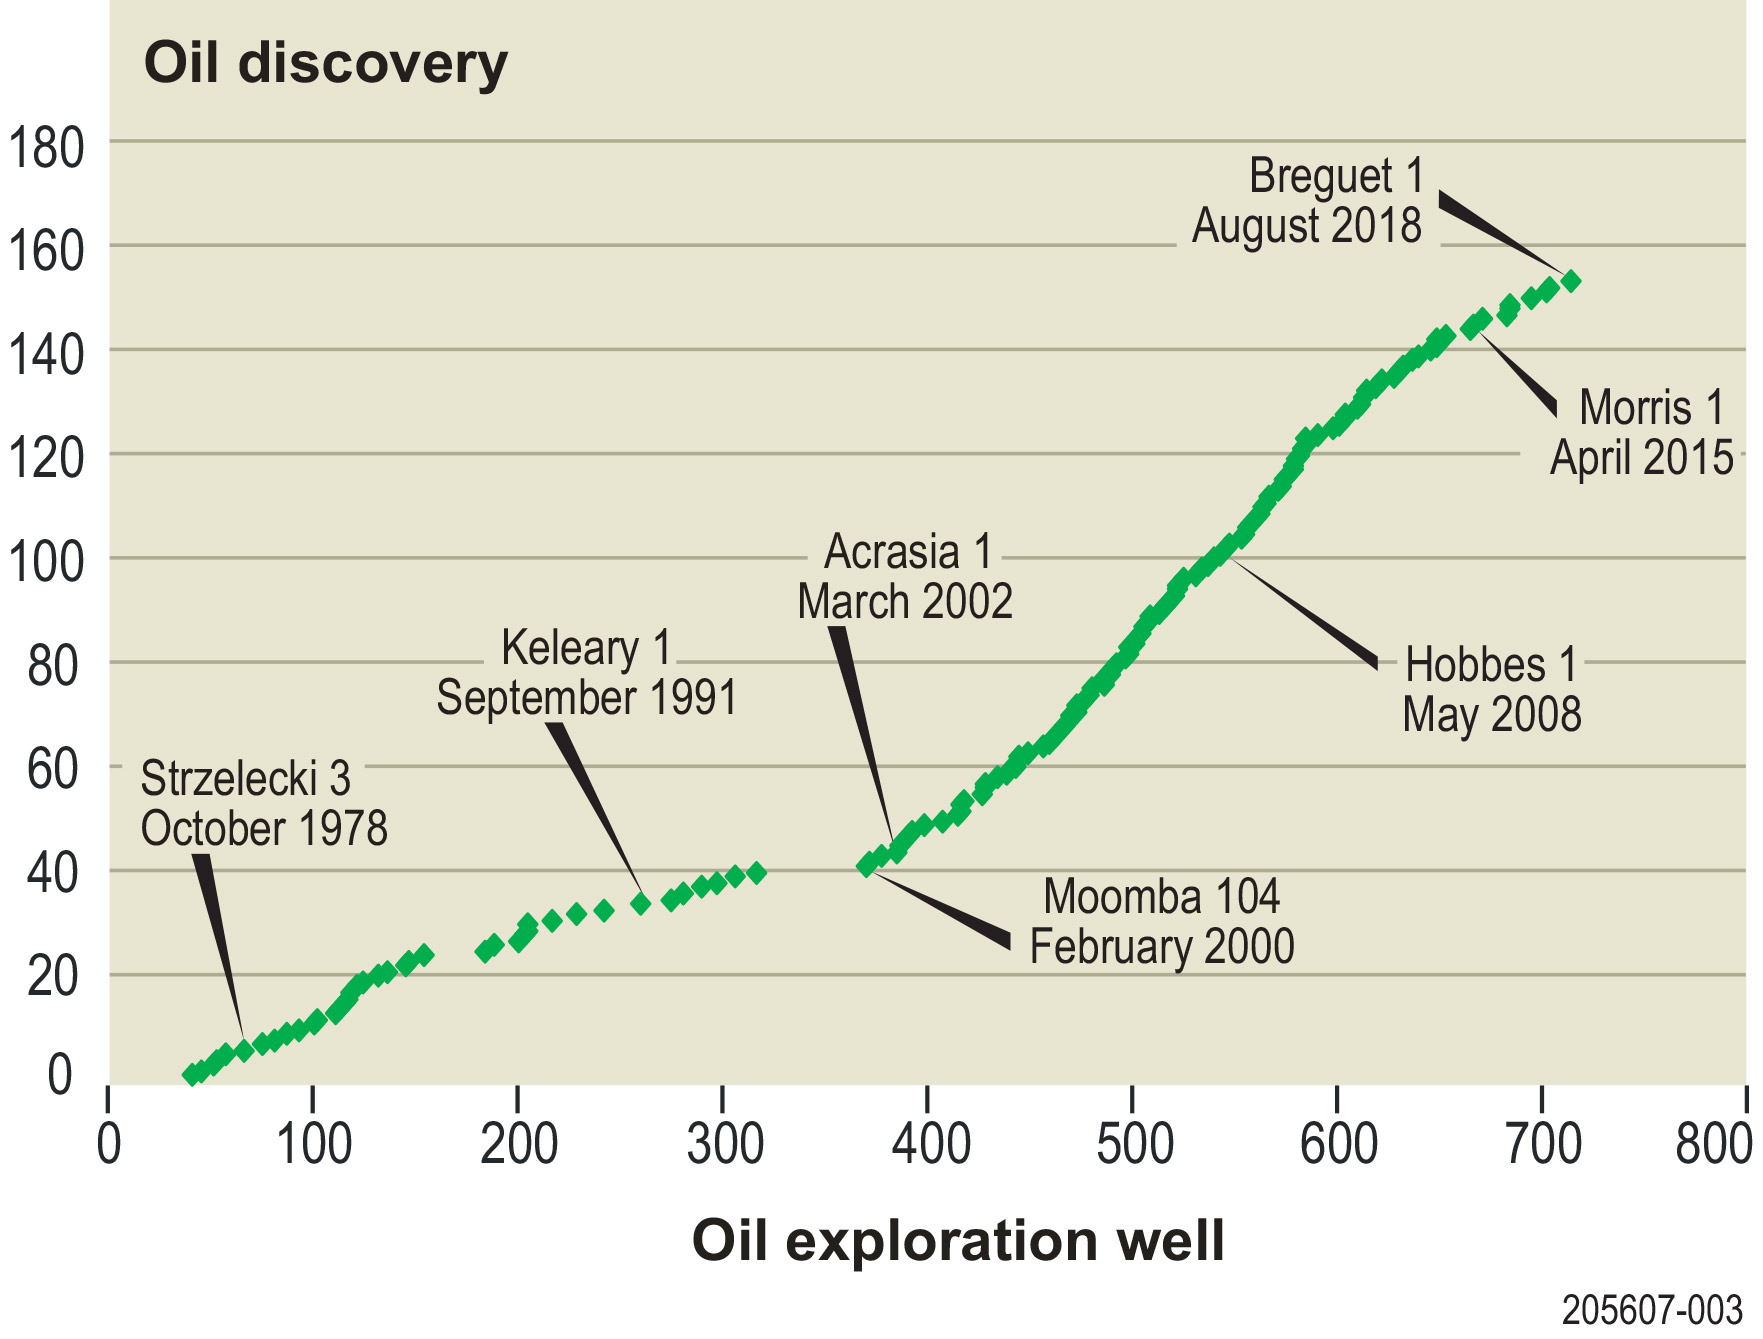 Rate of oil discoveries in South Australia, showing the last oil discovery was Breguet 1 in August 2018.